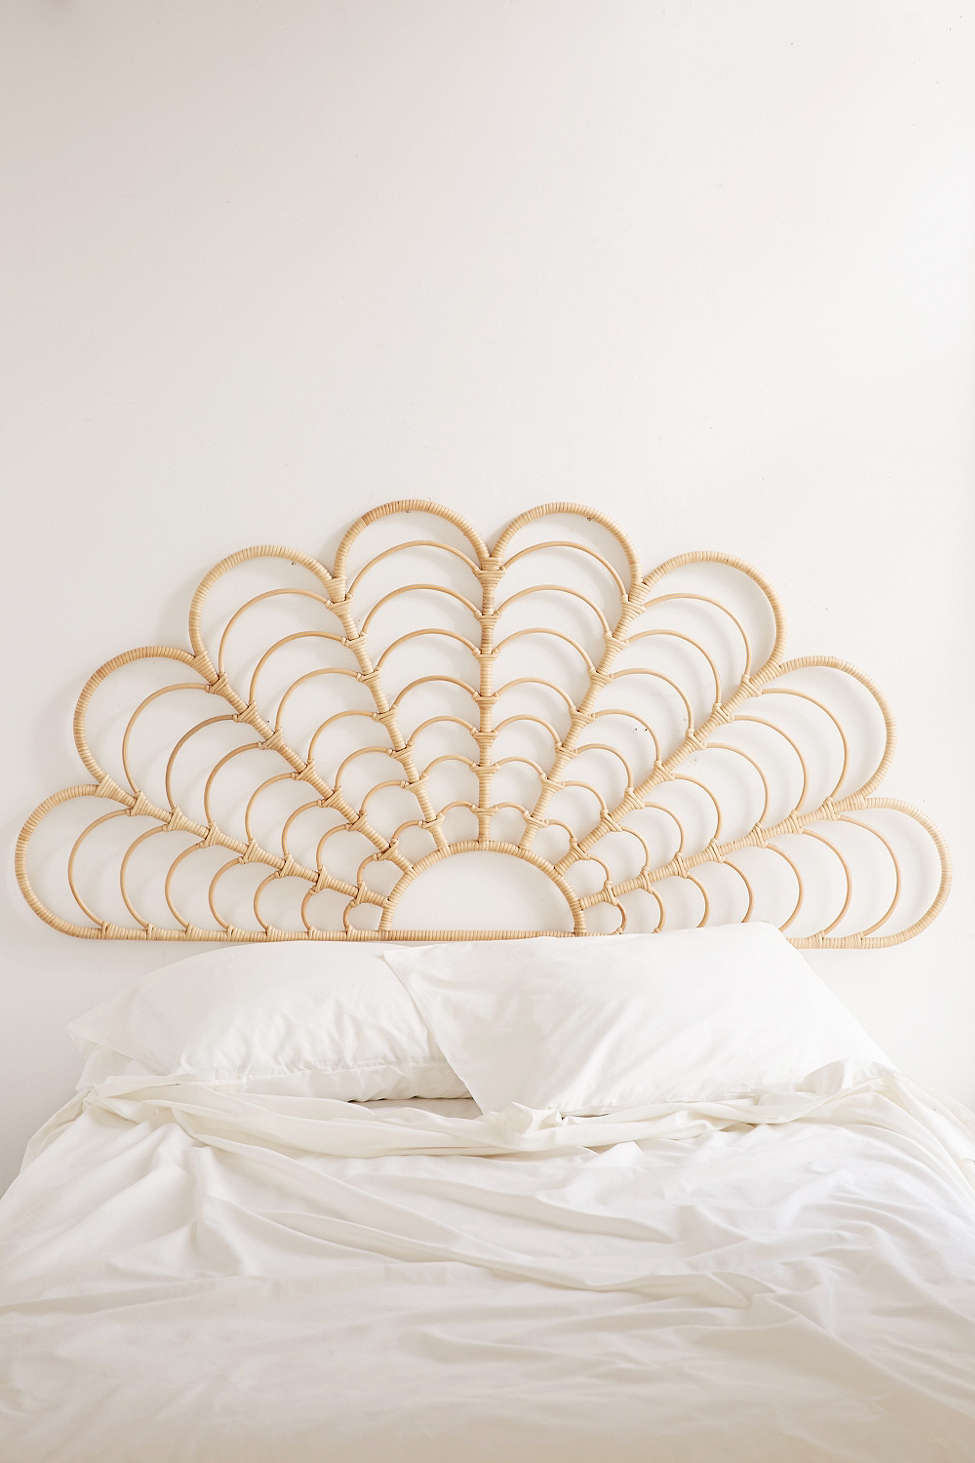 Rattan headboard from Urban Outfitters